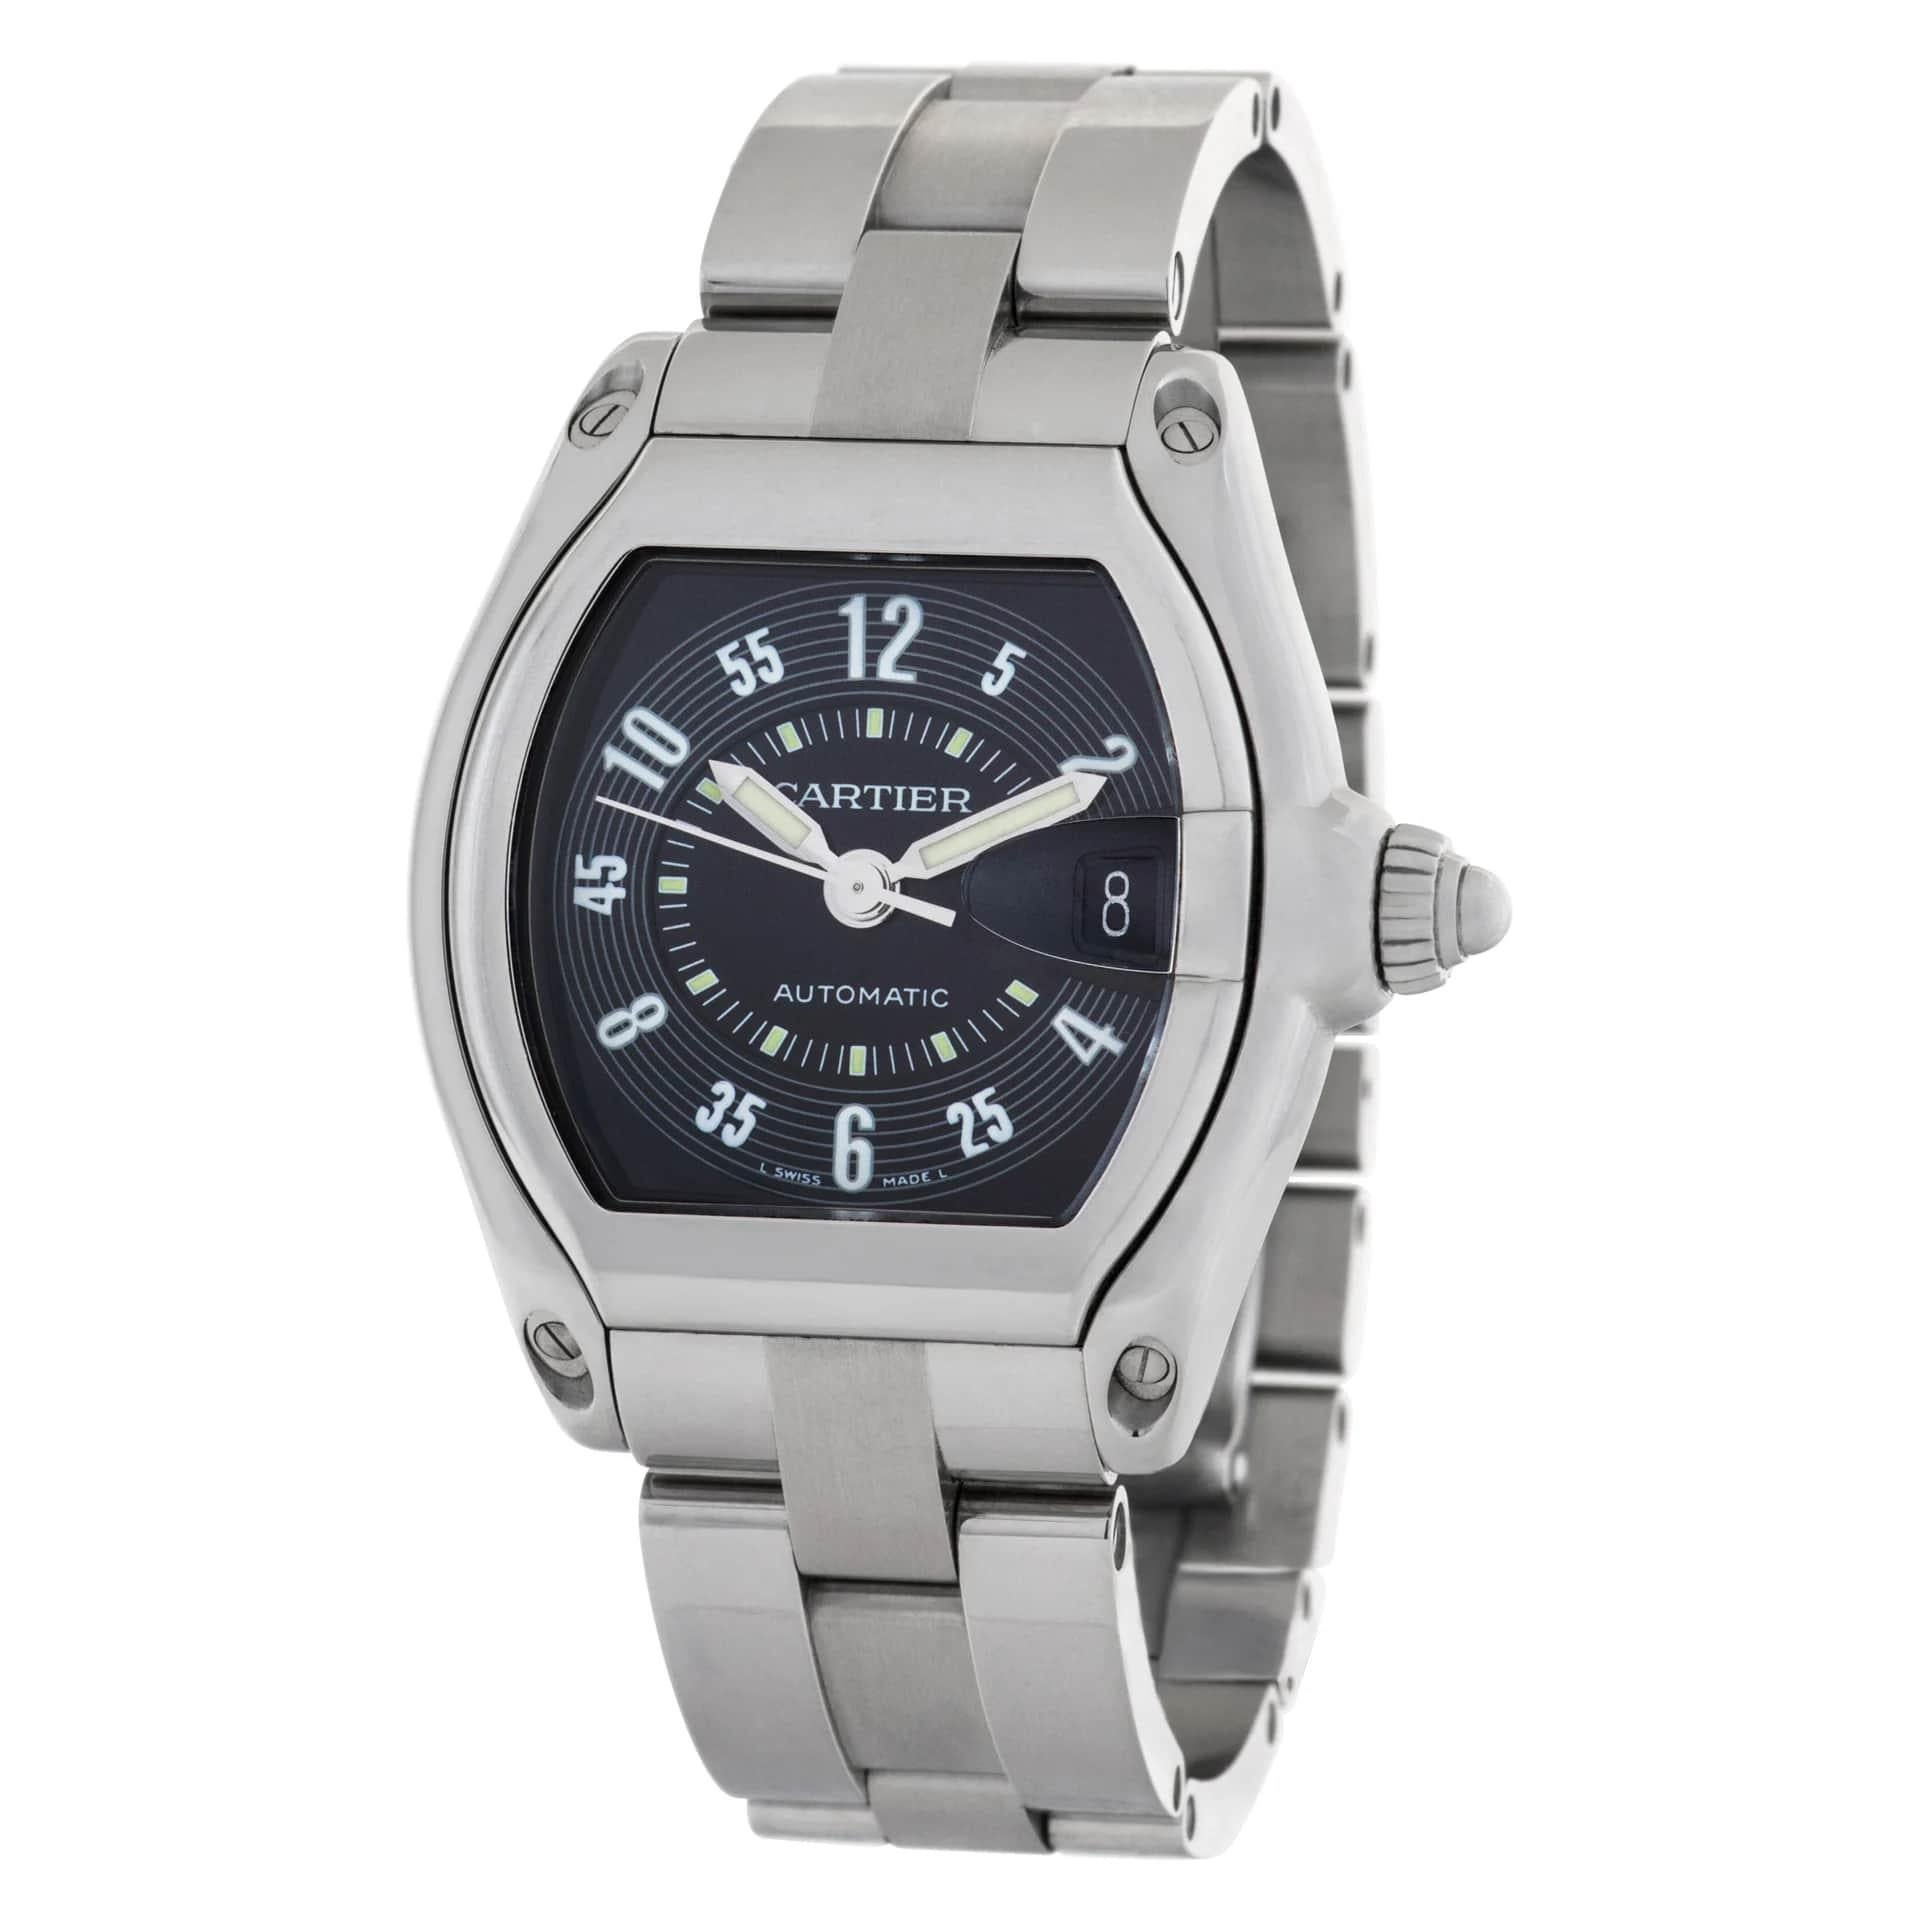 Cartier Roadster in stainless steel. Auto w/ sweep seconds and date. 38 mm case size. Ref W62004V3. Circa 2000s Fine Pre-owned Cartier Watch. Certified preowned Classic Cartier Roadster W62004V3 watch is made out of Stainless steel on a Stainless